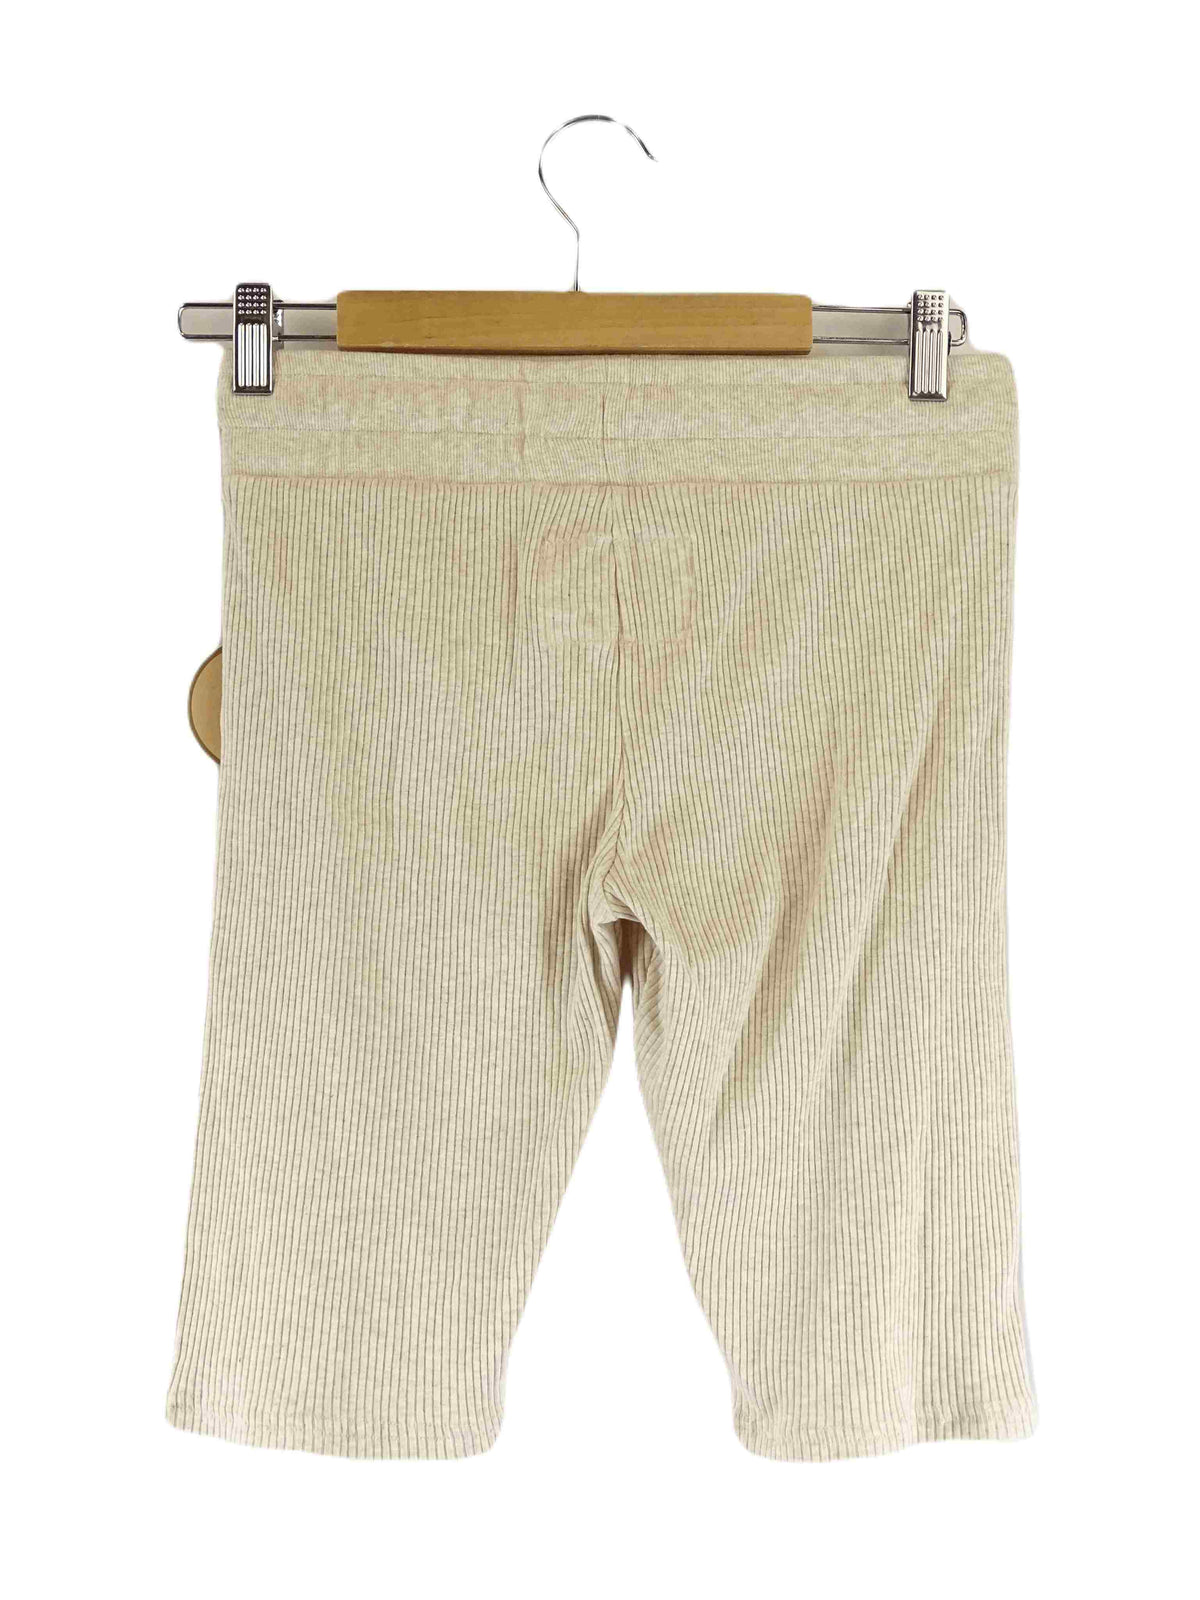 Halo and Horns Cream Shorts M